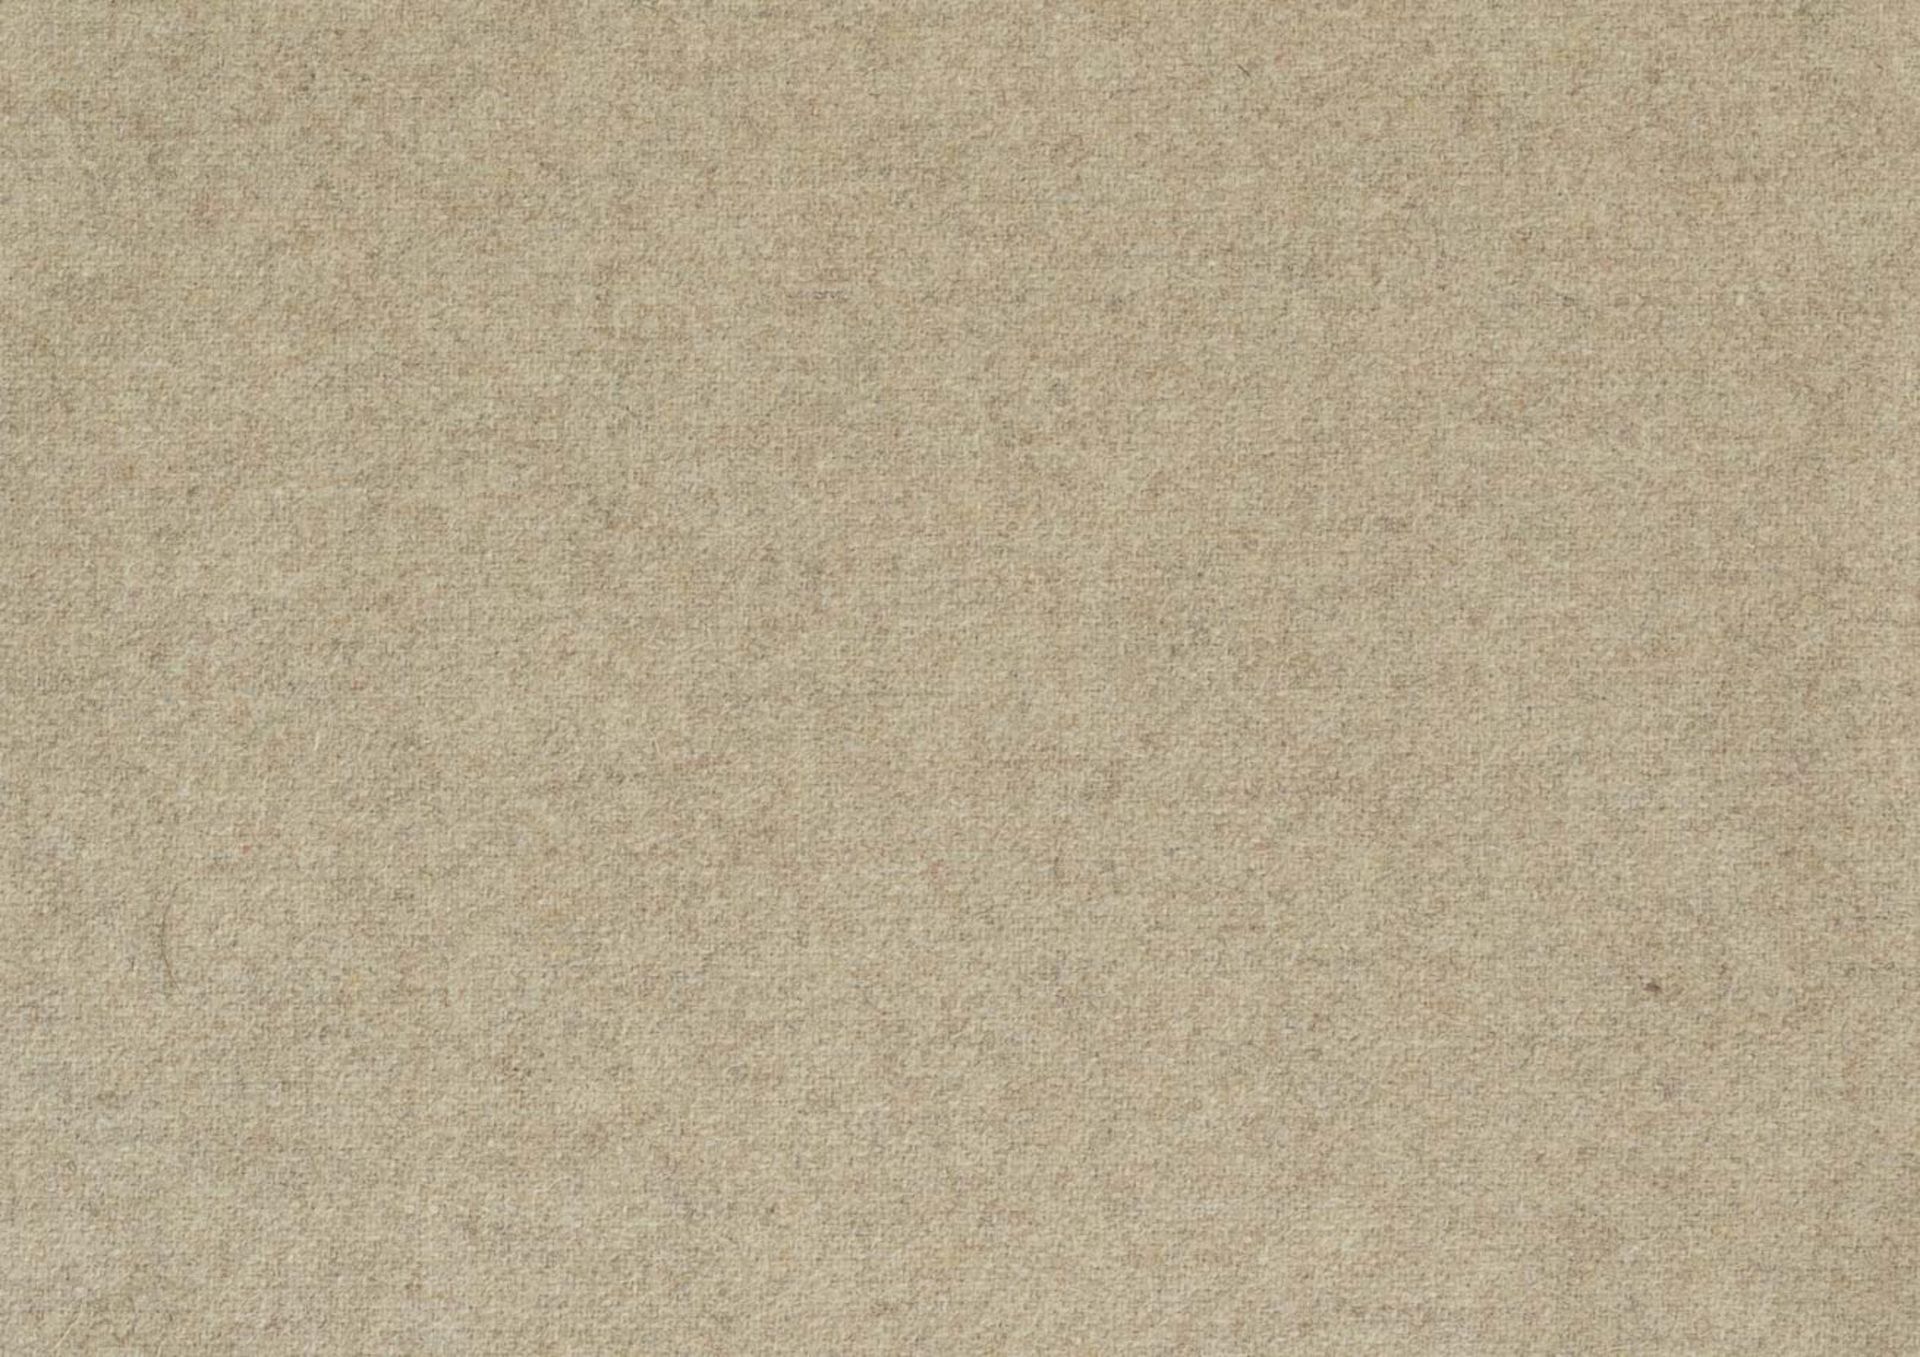 NEW ROLL TO CONTAIN 49.9 METRES OF TEXTAAFOAM FACET BEIGE 1037 WOOL STYLE UPHOLSTERY FABRIC. RRP £